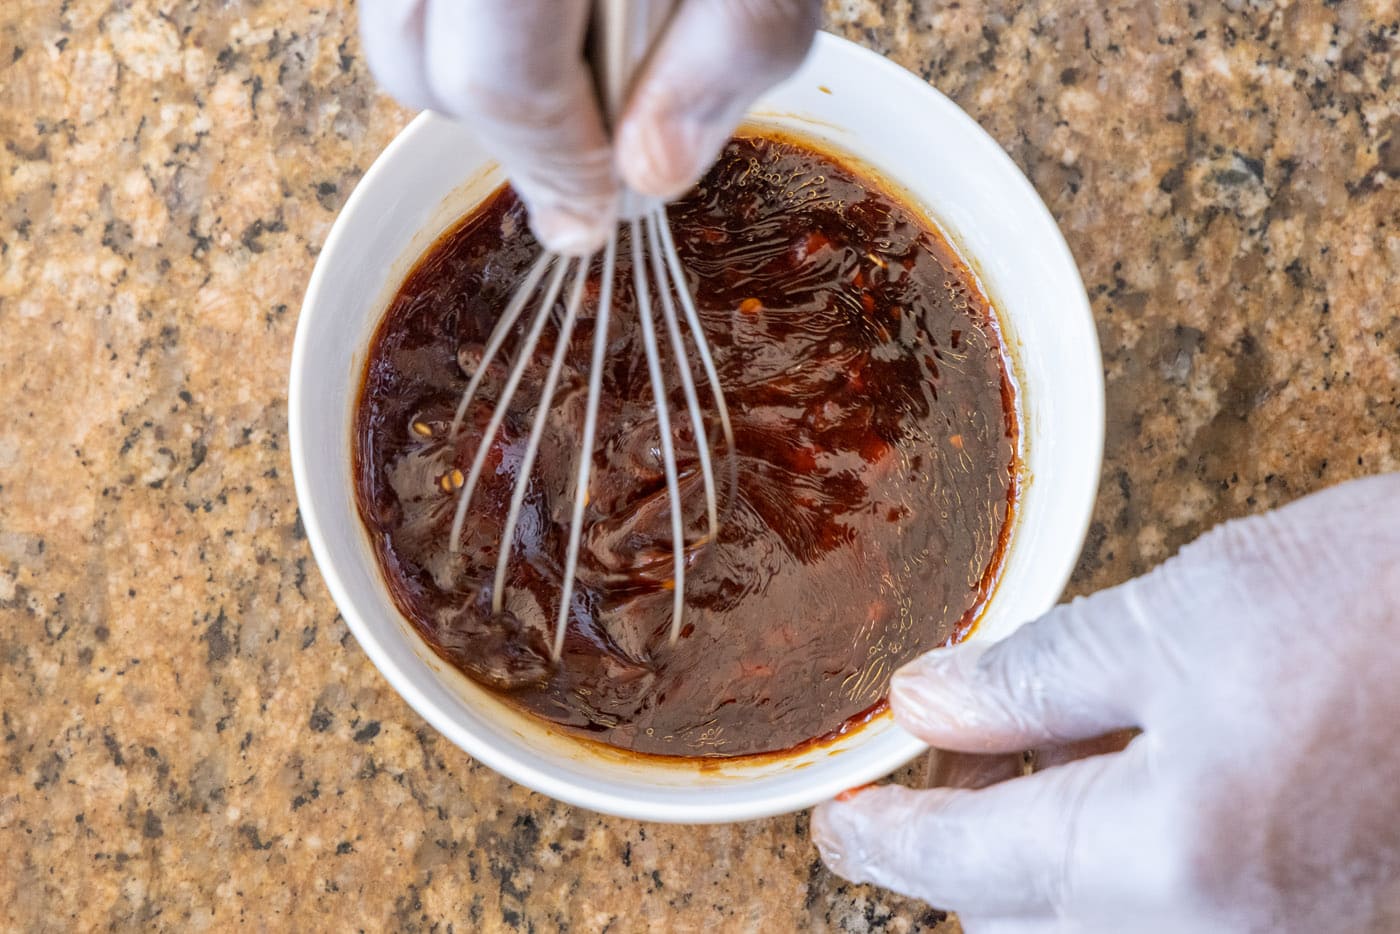 whisking kung pao sauce in a bowl